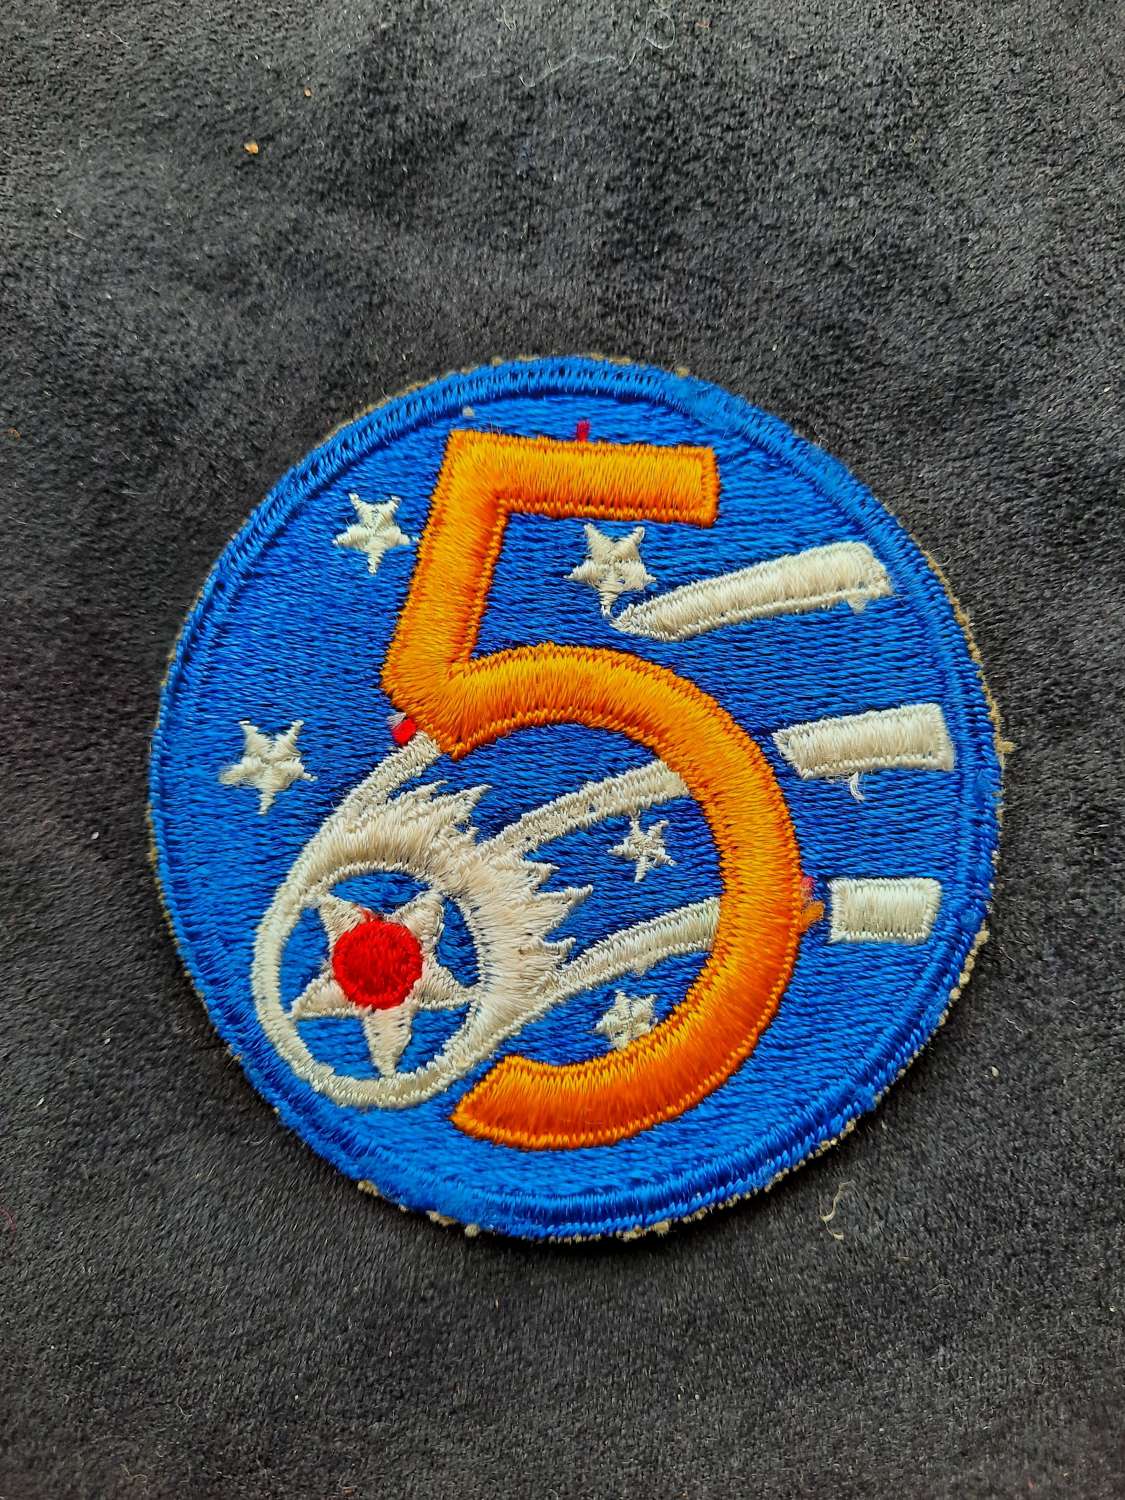 USAAF 5th Air Force Patch